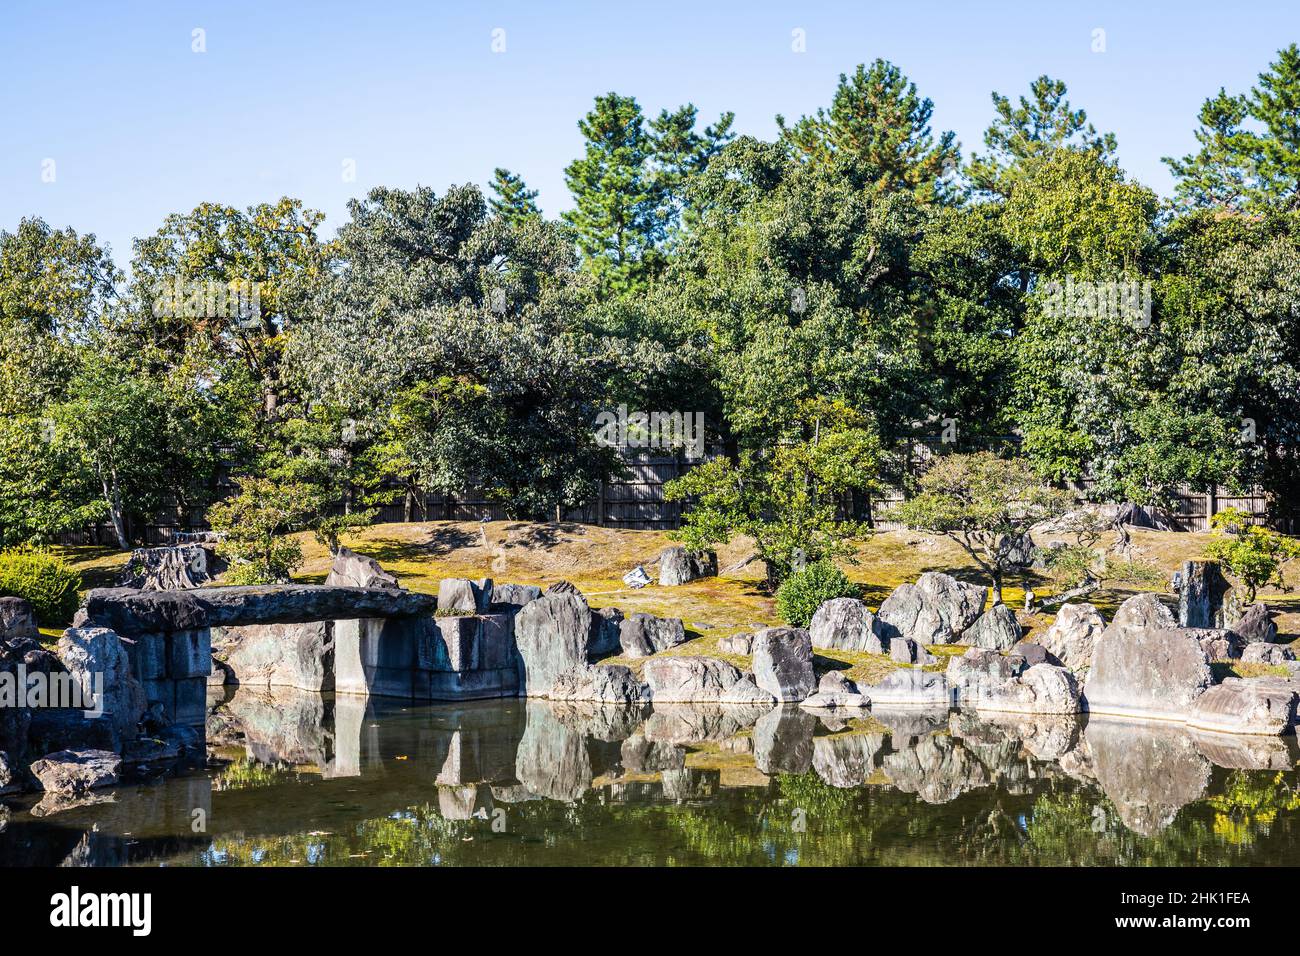 Japanese Garden with a shallow pond and rocks surrounding the edge in daylight. Stock Photo